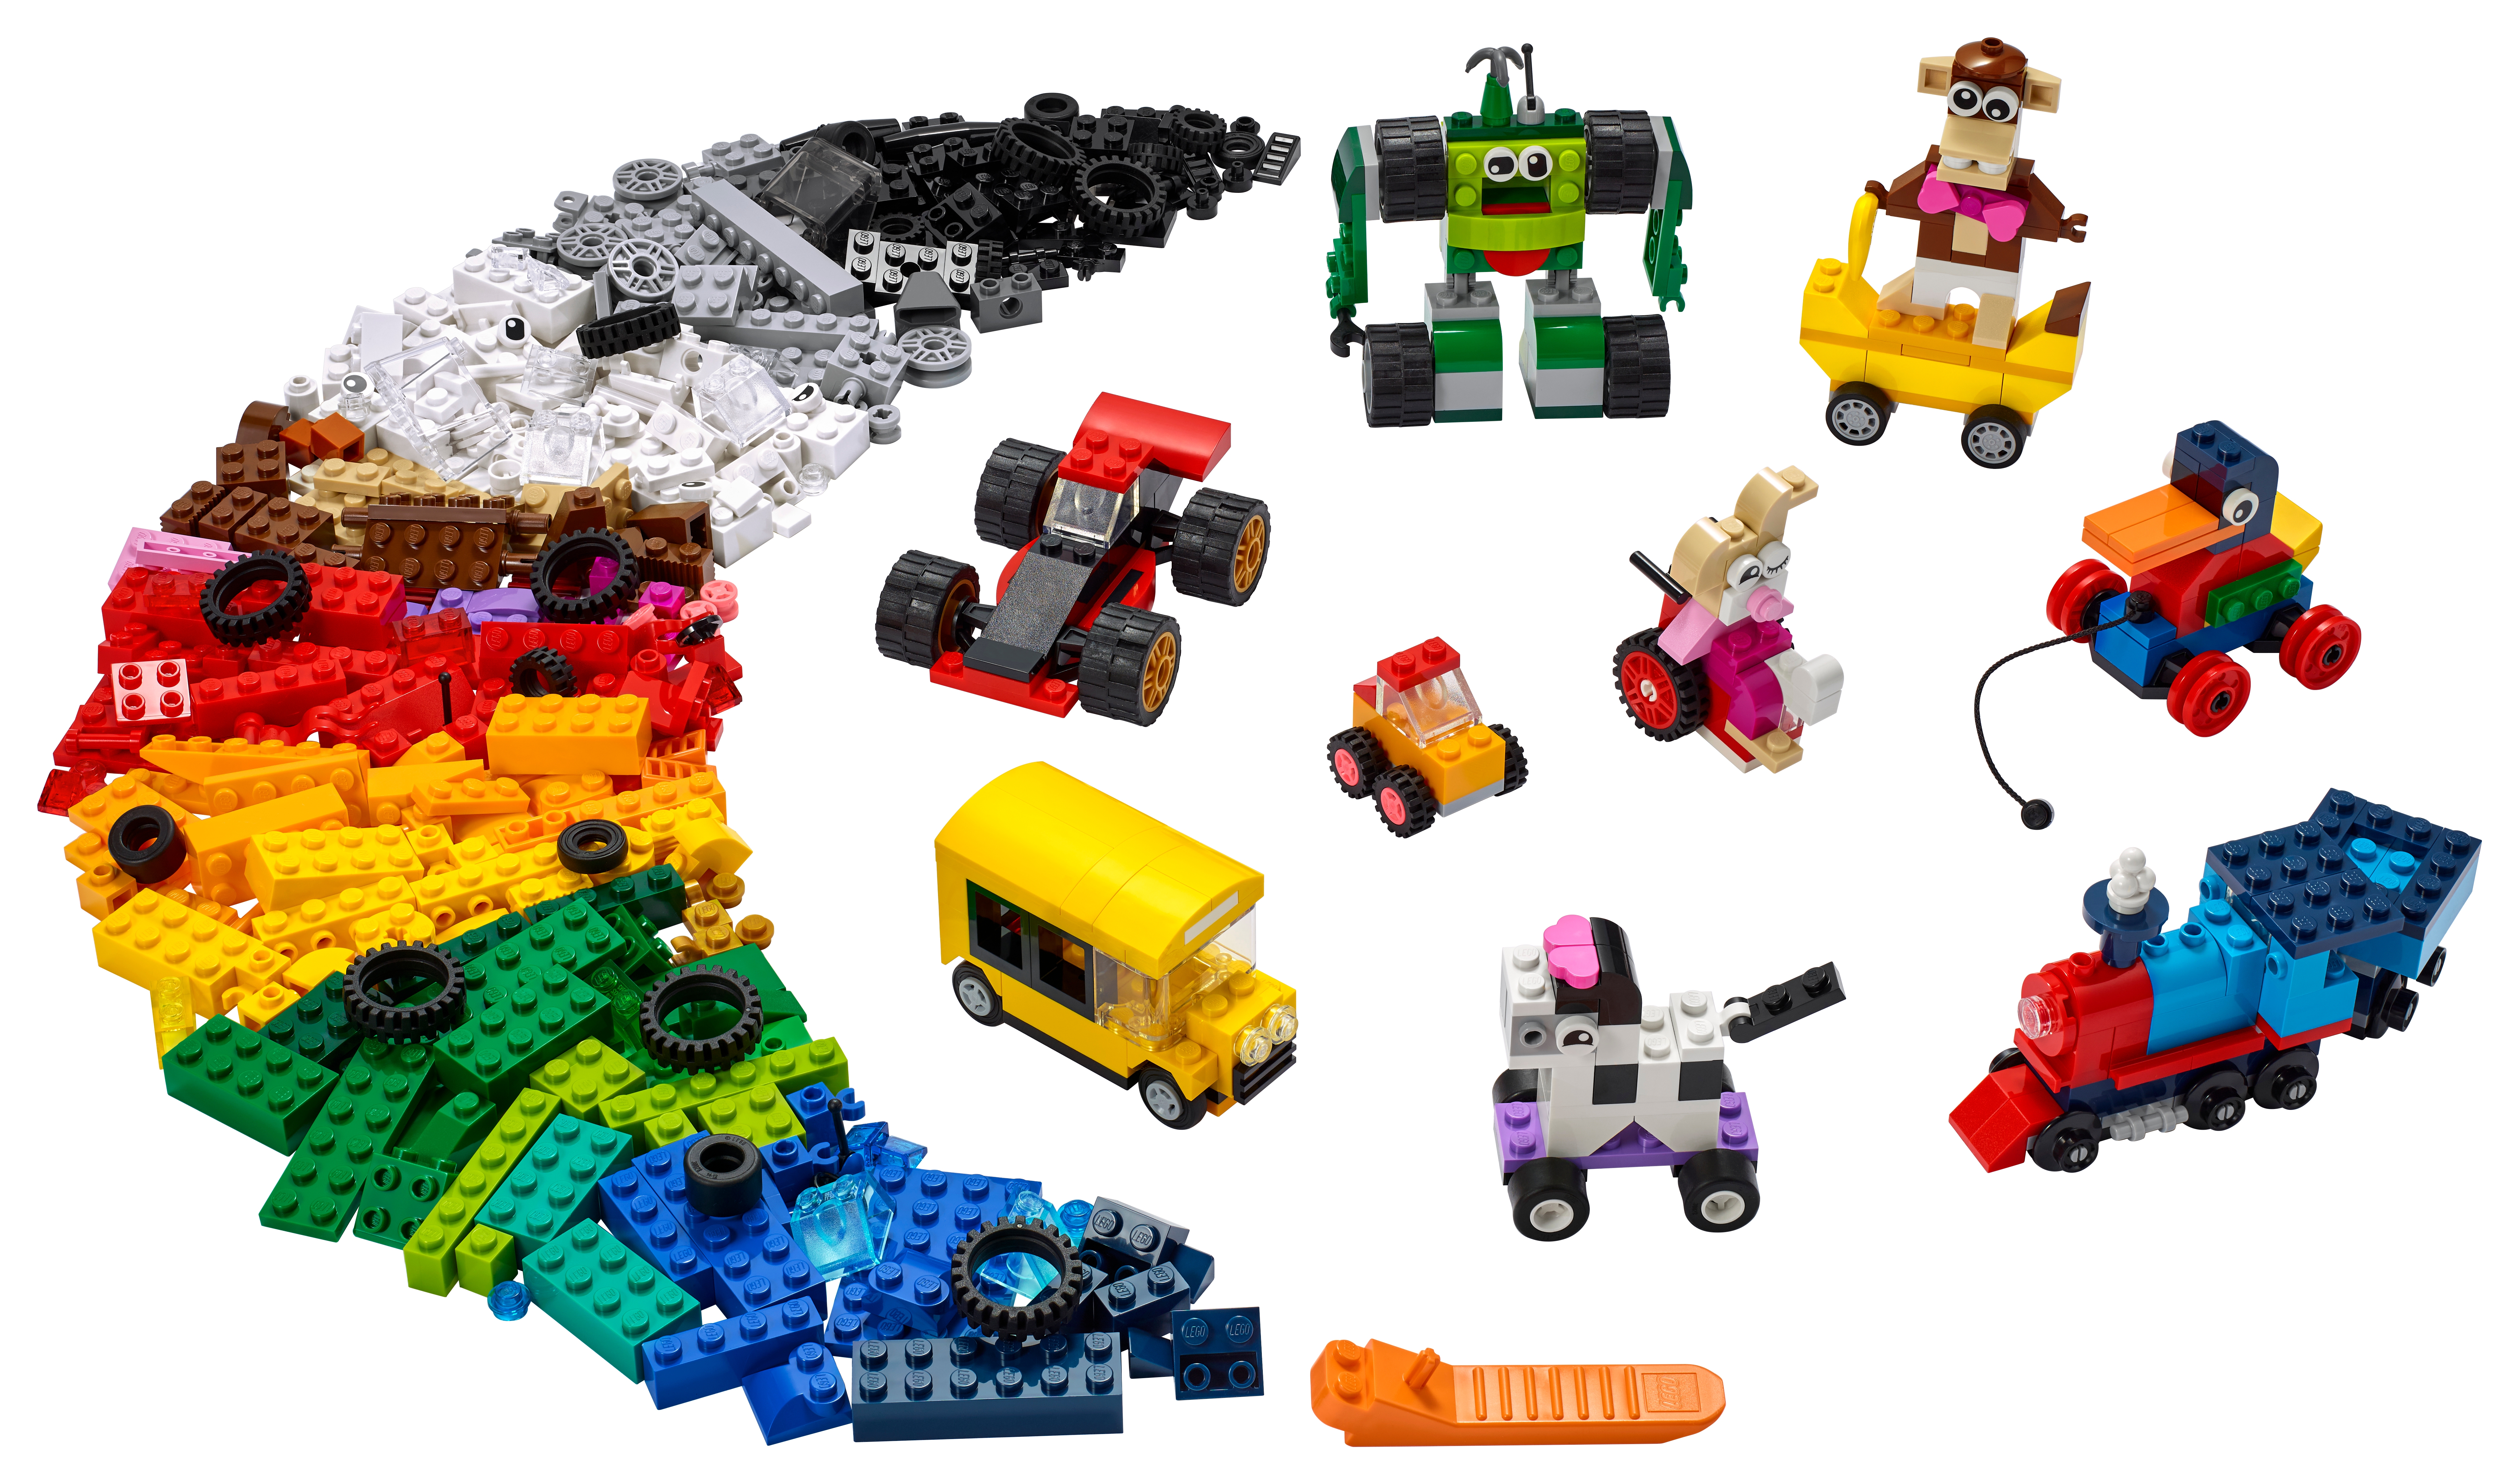 Bricks and Wheels 11014 | Classic | Buy online at the Official LEGO® Shop GB